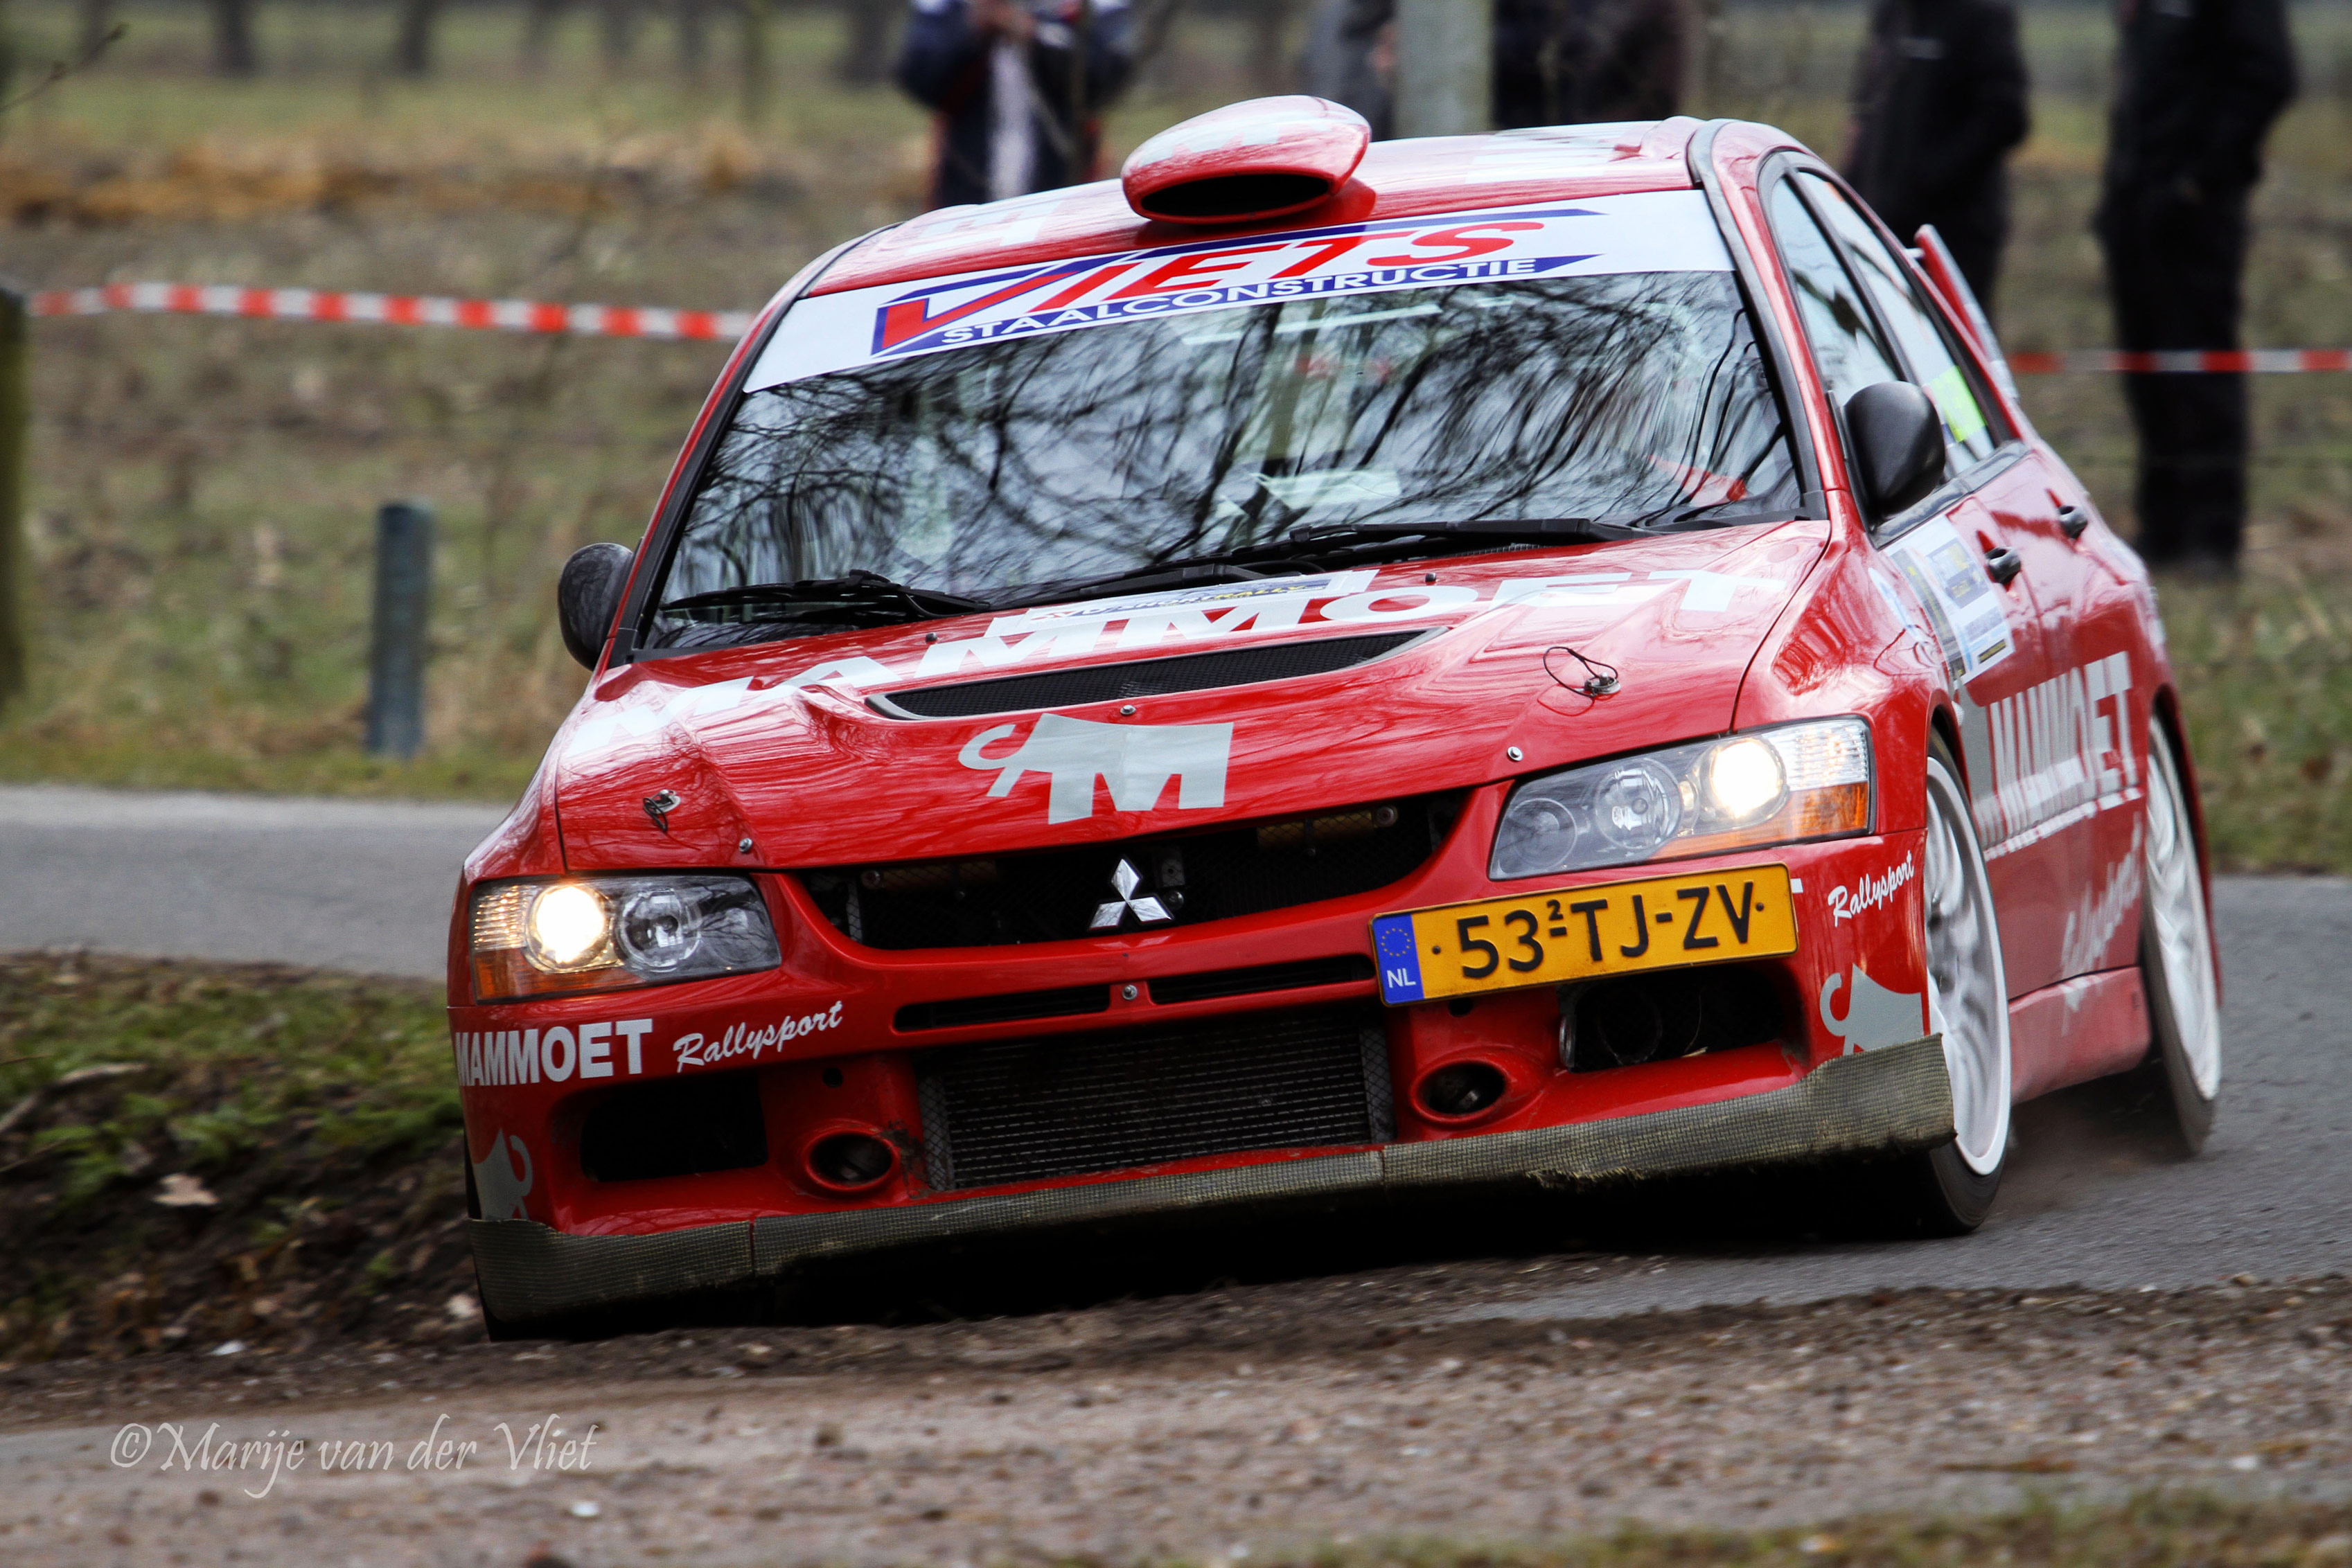 Mitsubishi Evo Rally Backgrounds, Compatible - PC, Mobile, Gadgets| 3395x2264 px